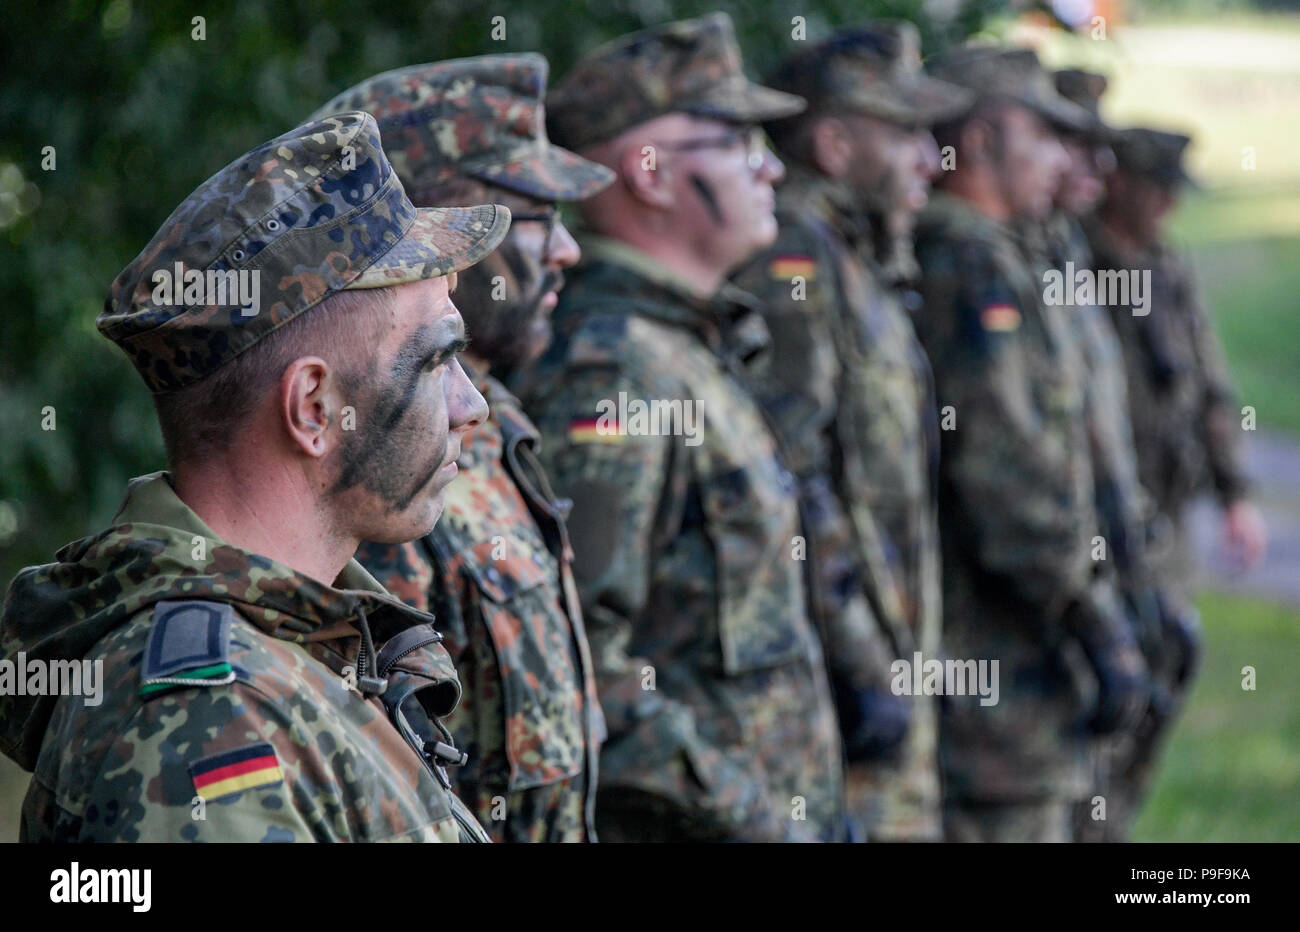 Hagenow, Germany. 18th July, 2018. Soldiers from the Panzergrenadier batallion 401 preparing for combat training. The German armed forces wants to enhance physical performance with a new basic training. The inspector of the army, Lieutenant General Vollmer, presented a pilot project and offered an insight into the concept of the new training at different stations. Credit: Axel Heimken/dpa/Alamy Live News Stock Photo